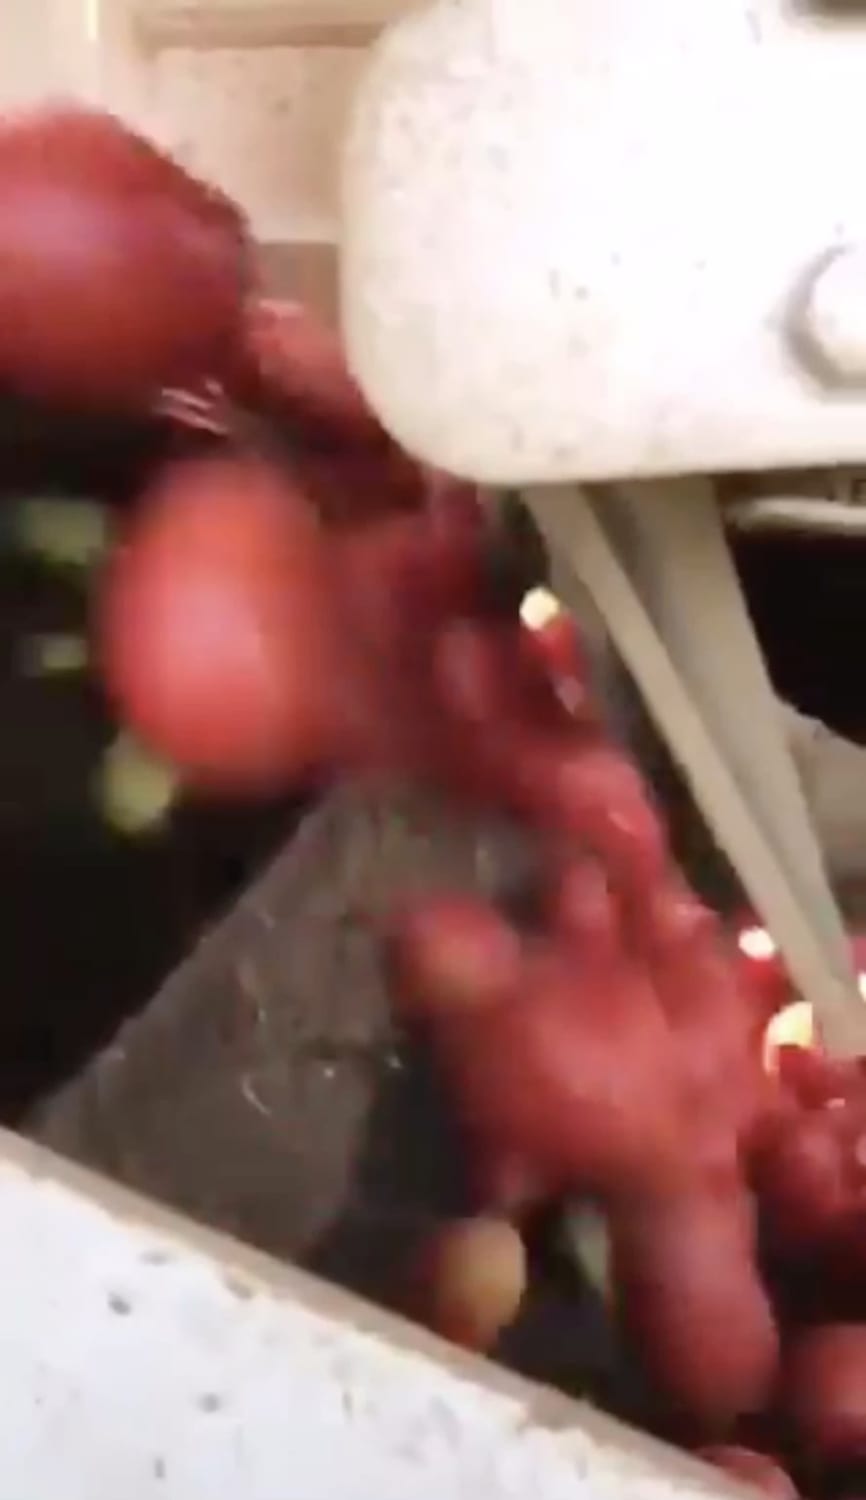 Machine that sorts unripe tomatoes from ripe ones